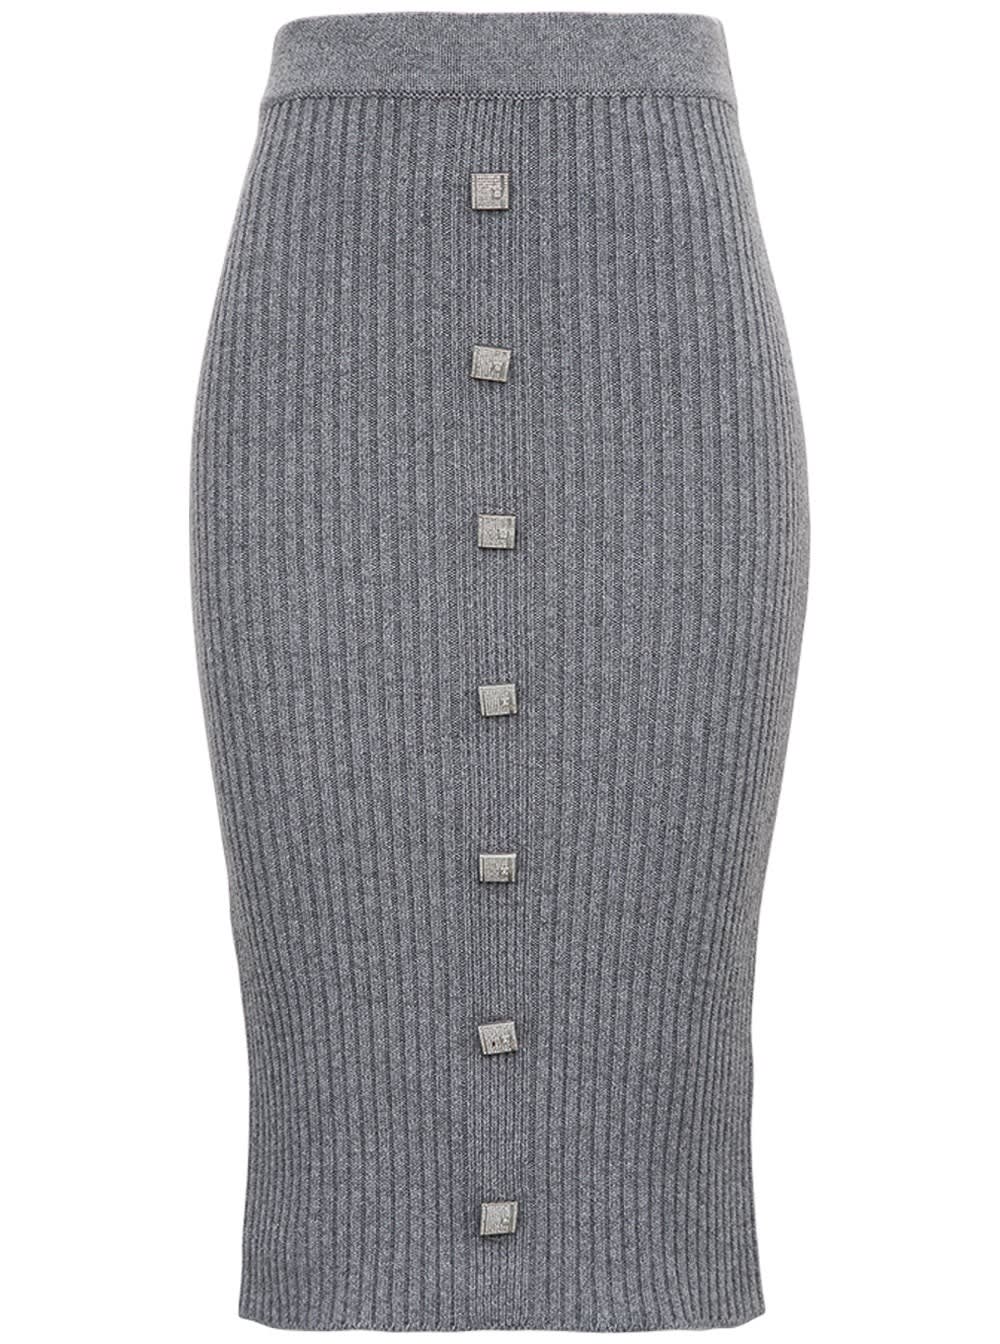 Giuseppe di Morabito Ribbed Knit Skirt With Buttons